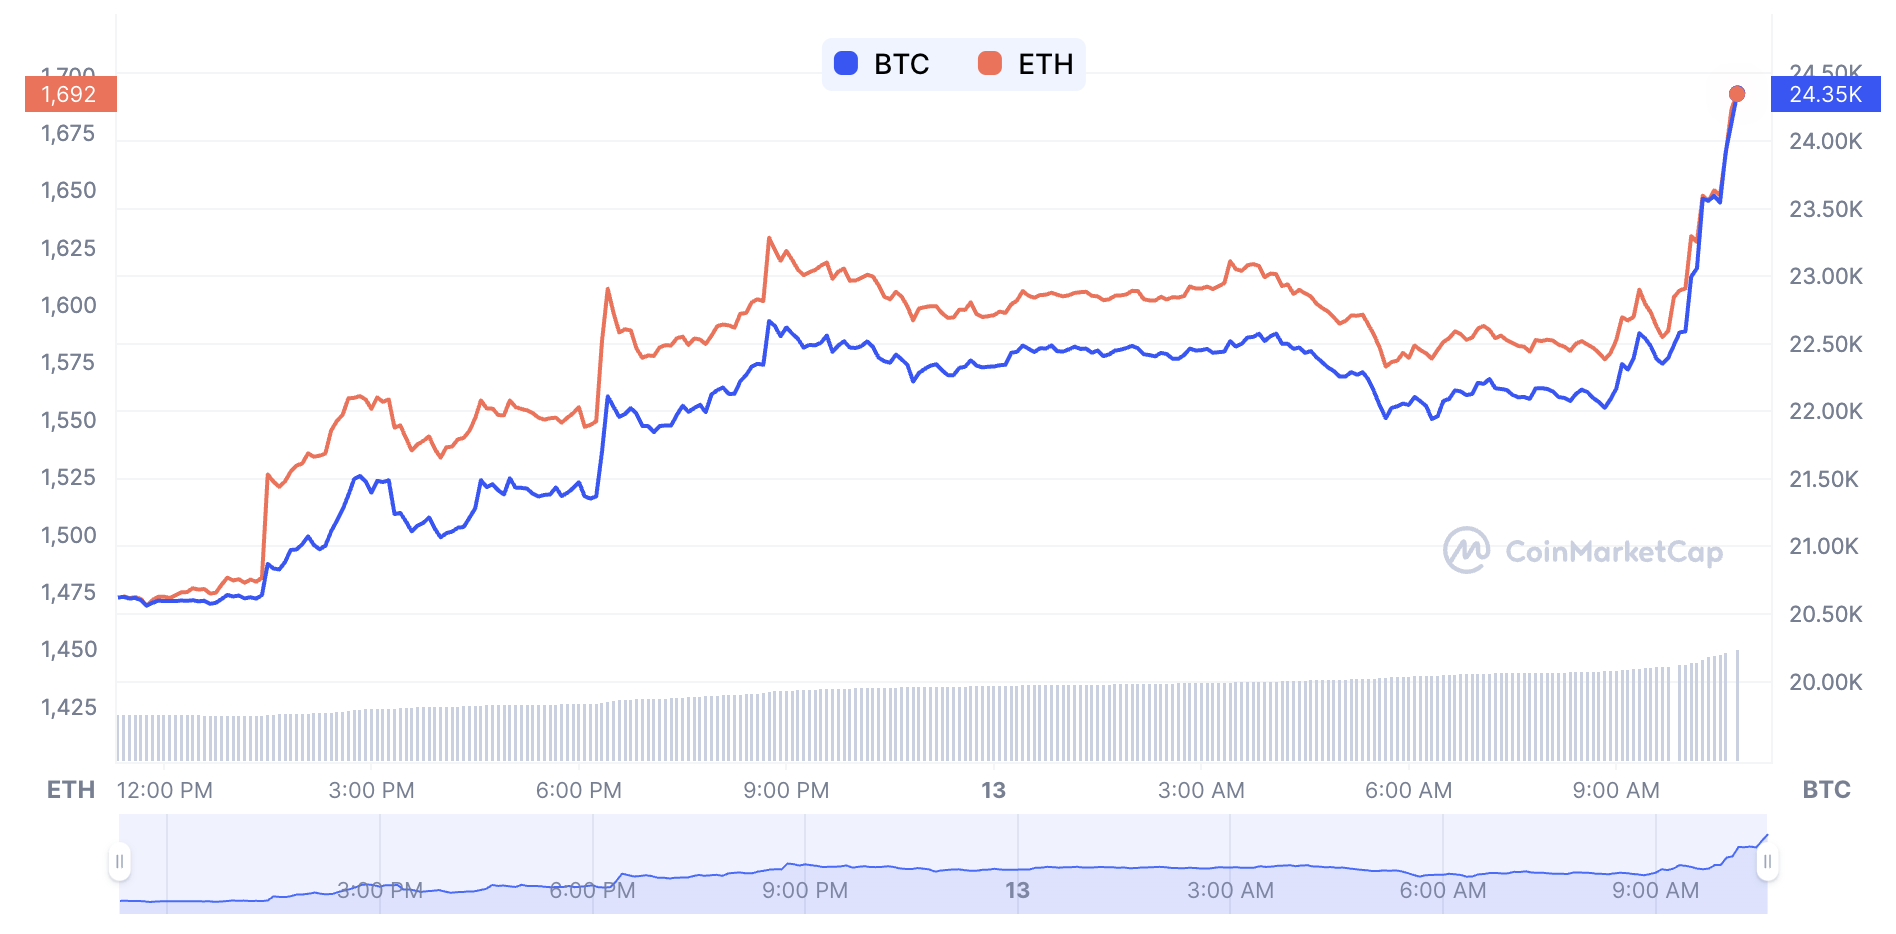 A picture of bitcoin and ether prices against USD over the past 24 hours